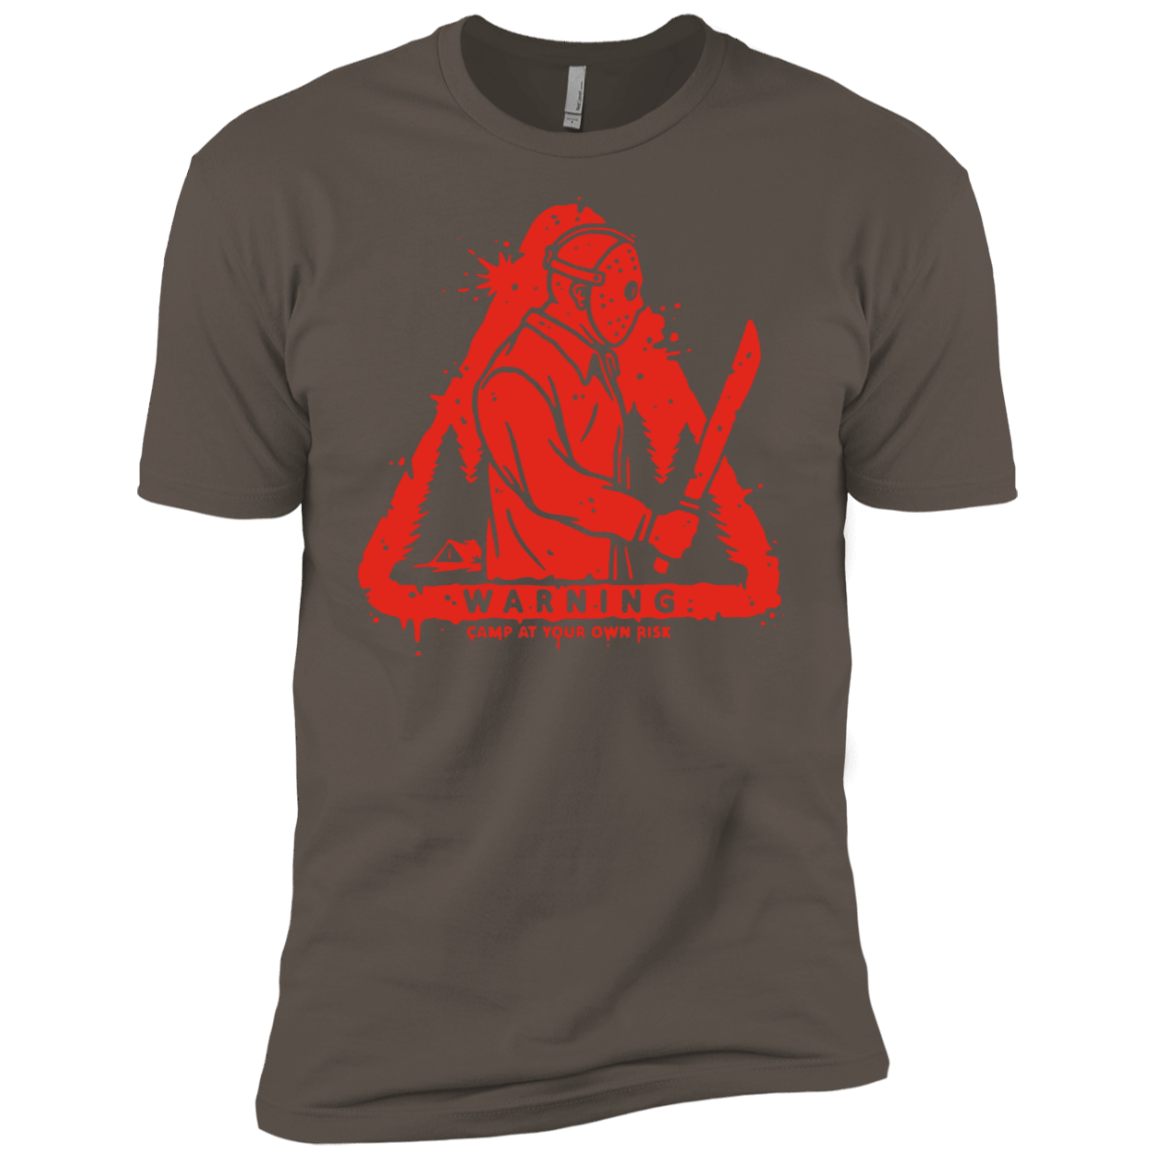 T-Shirts Warm Grey / X-Small Camp at Your Own Risk Men's Premium T-Shirt